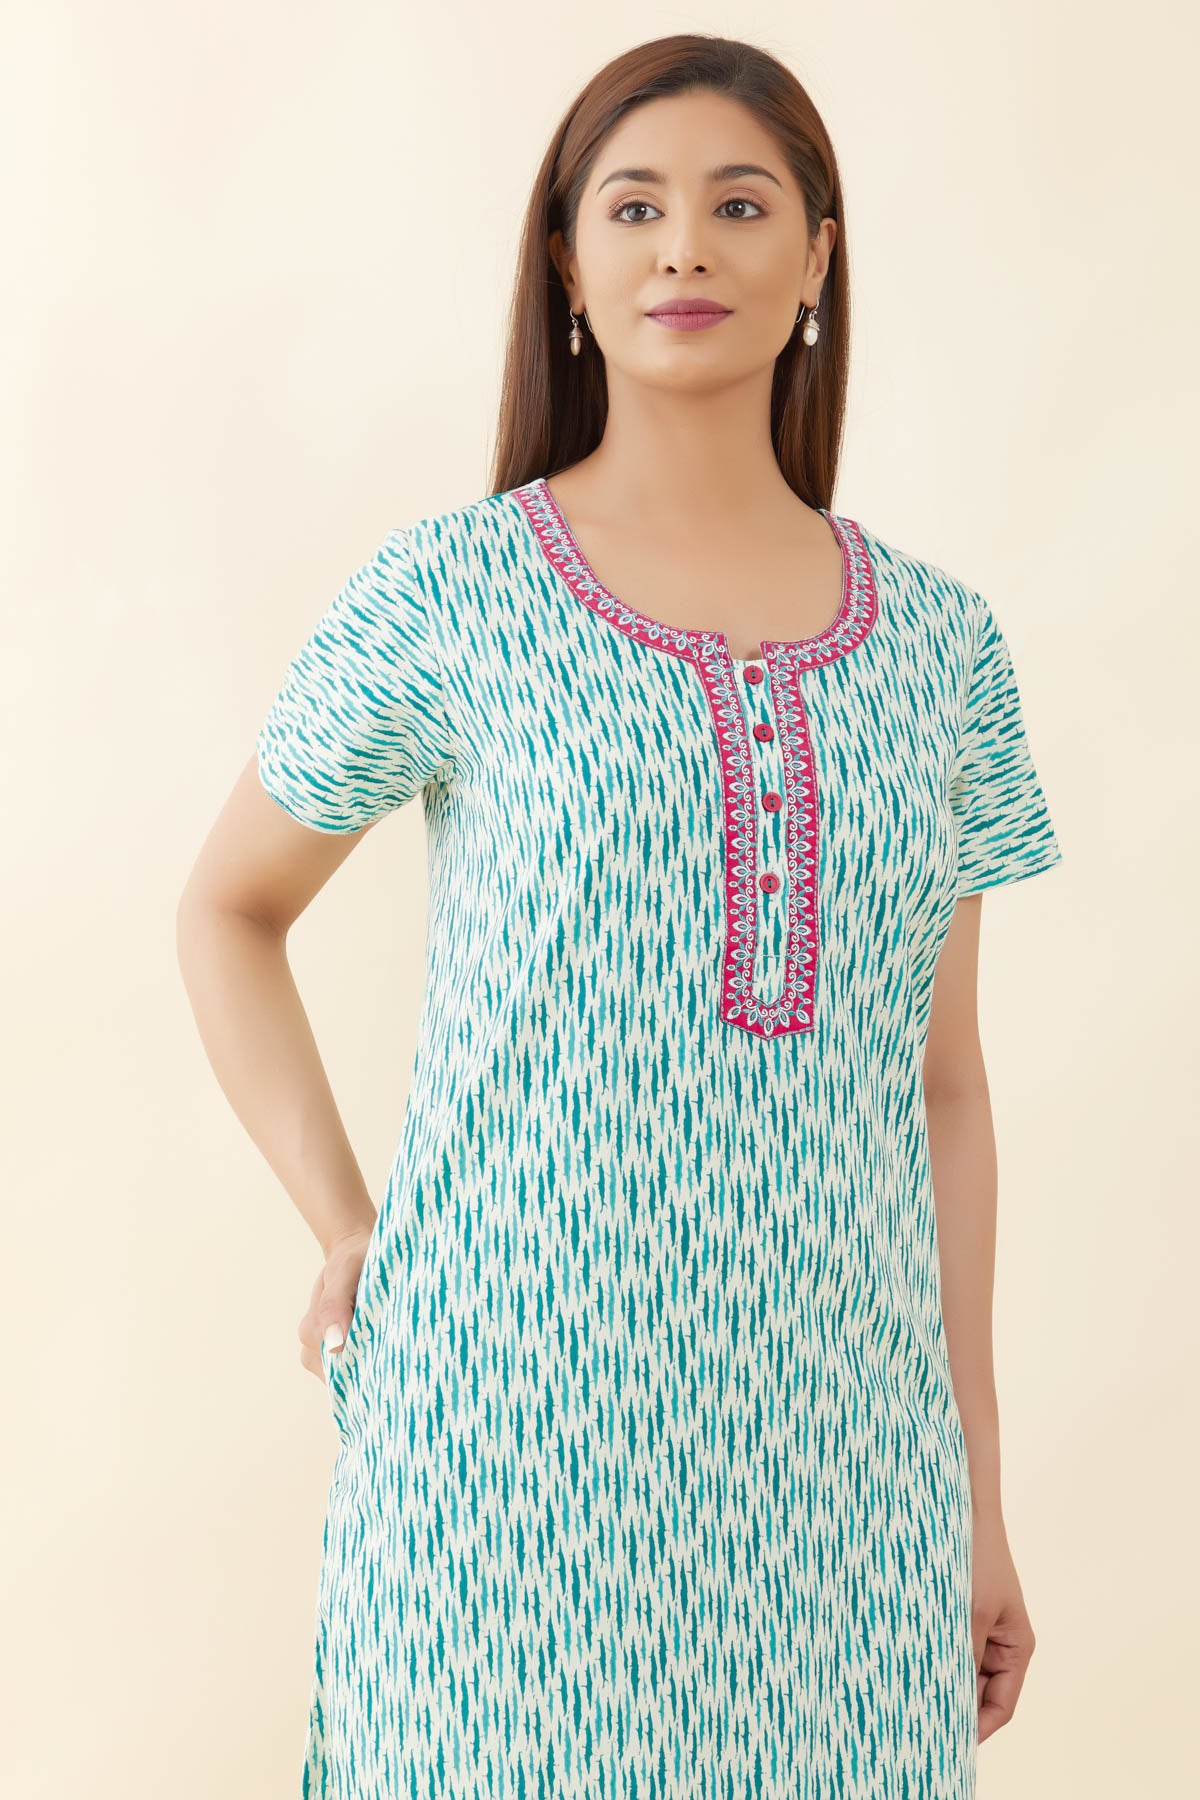 Abstract Print With Geometric Embroidered Yoke Nighty - Green